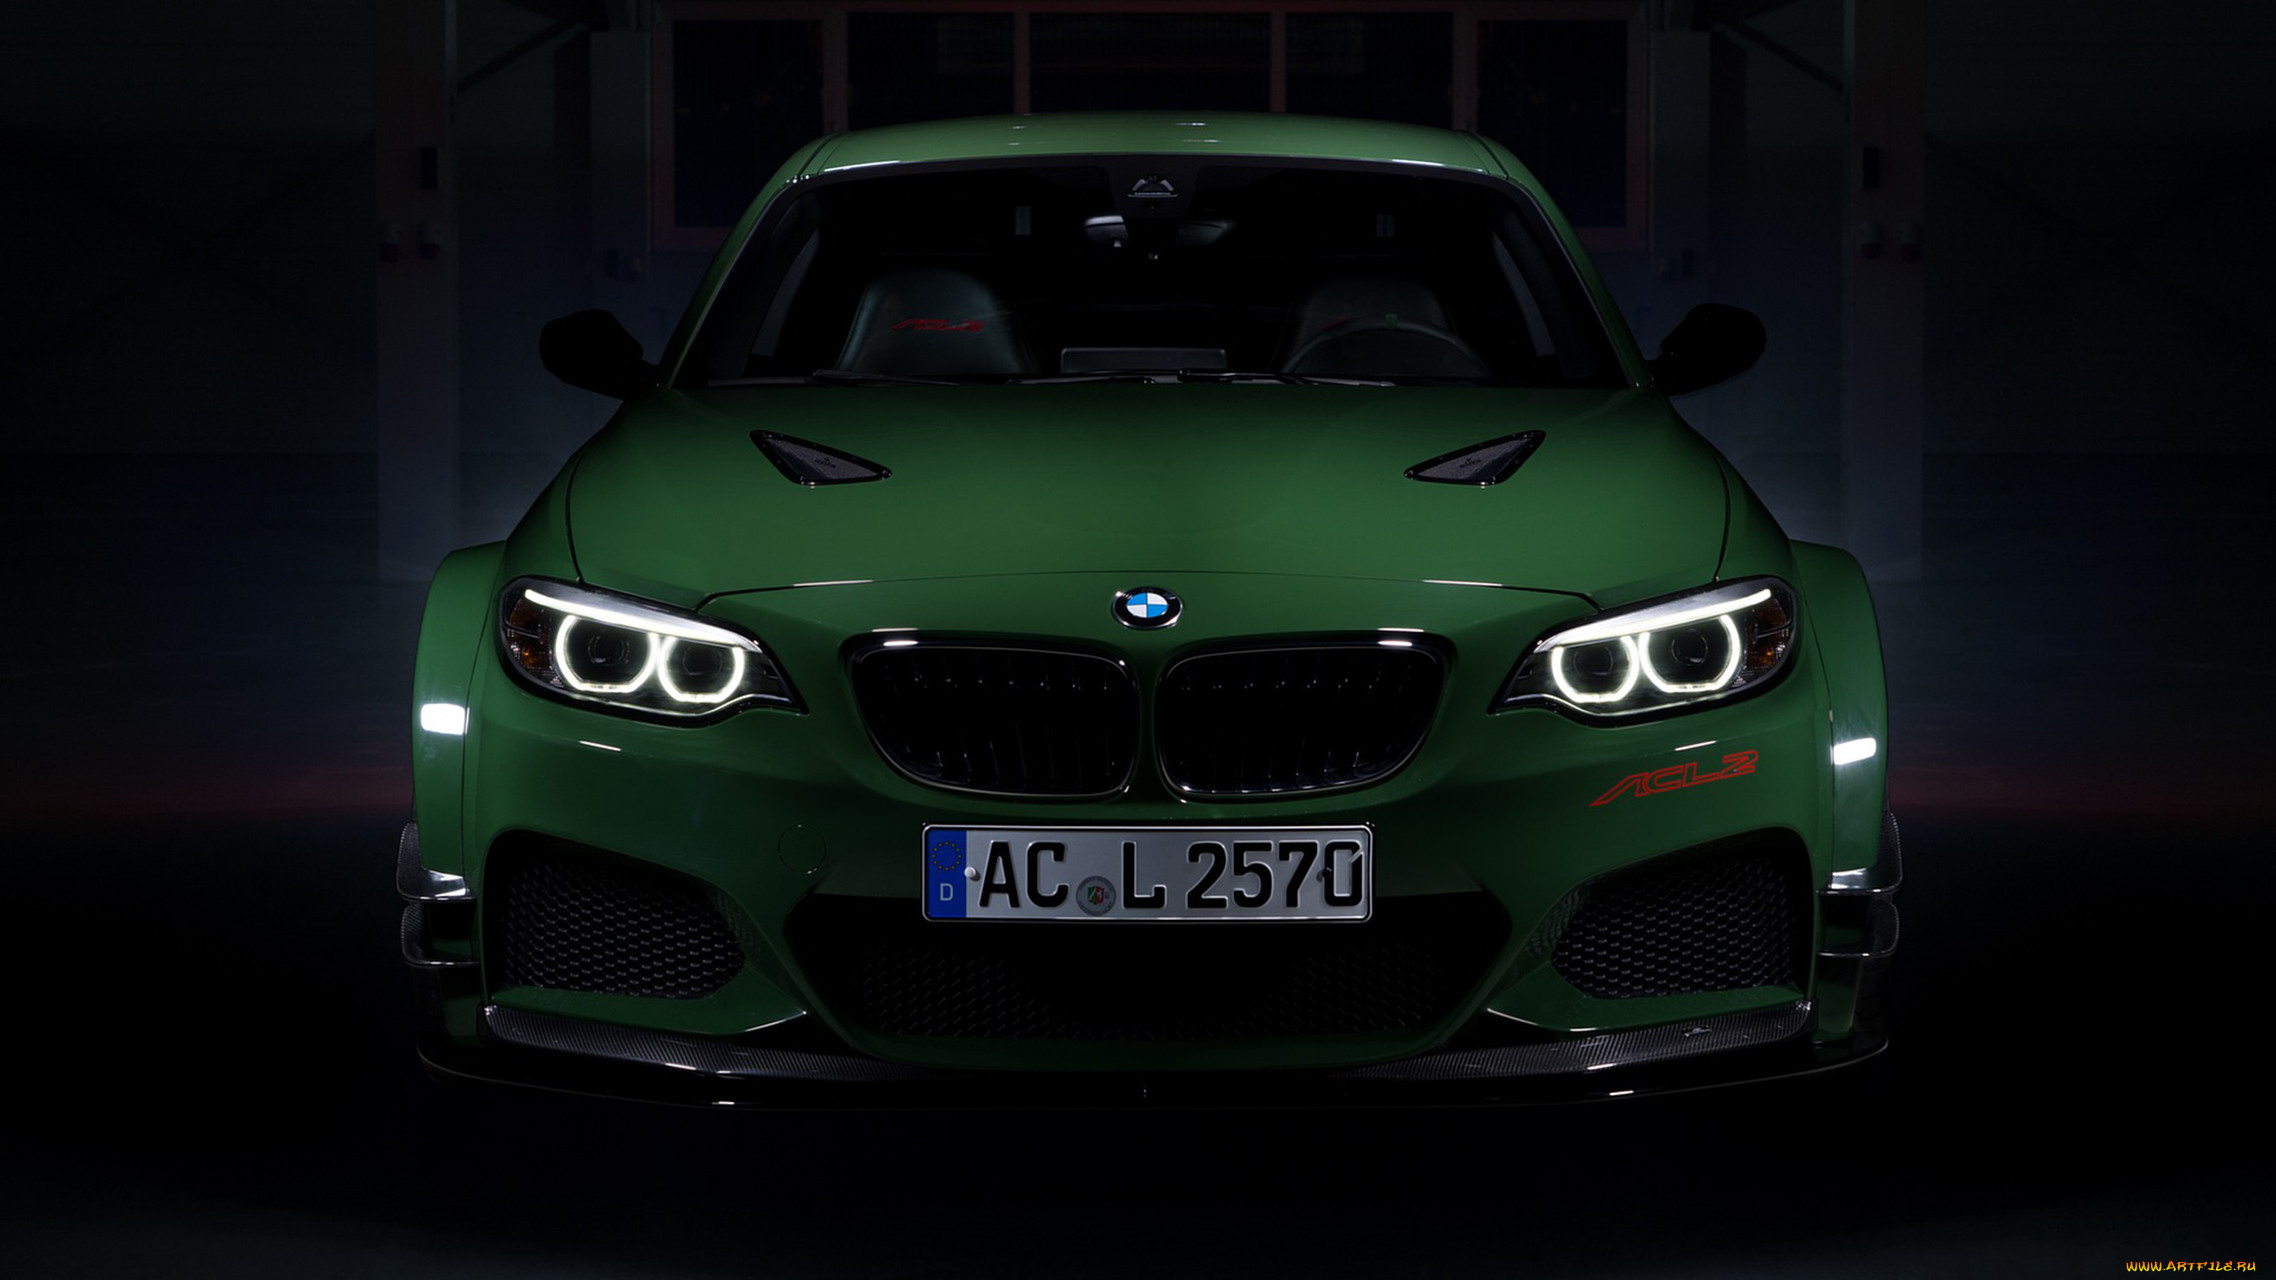 ac schnitzer acl2 concept based on the bmw m-235i coupe 2016, , bmw, ac, schnitzer, concept, based, acl2, 2016, coupe, m-235i